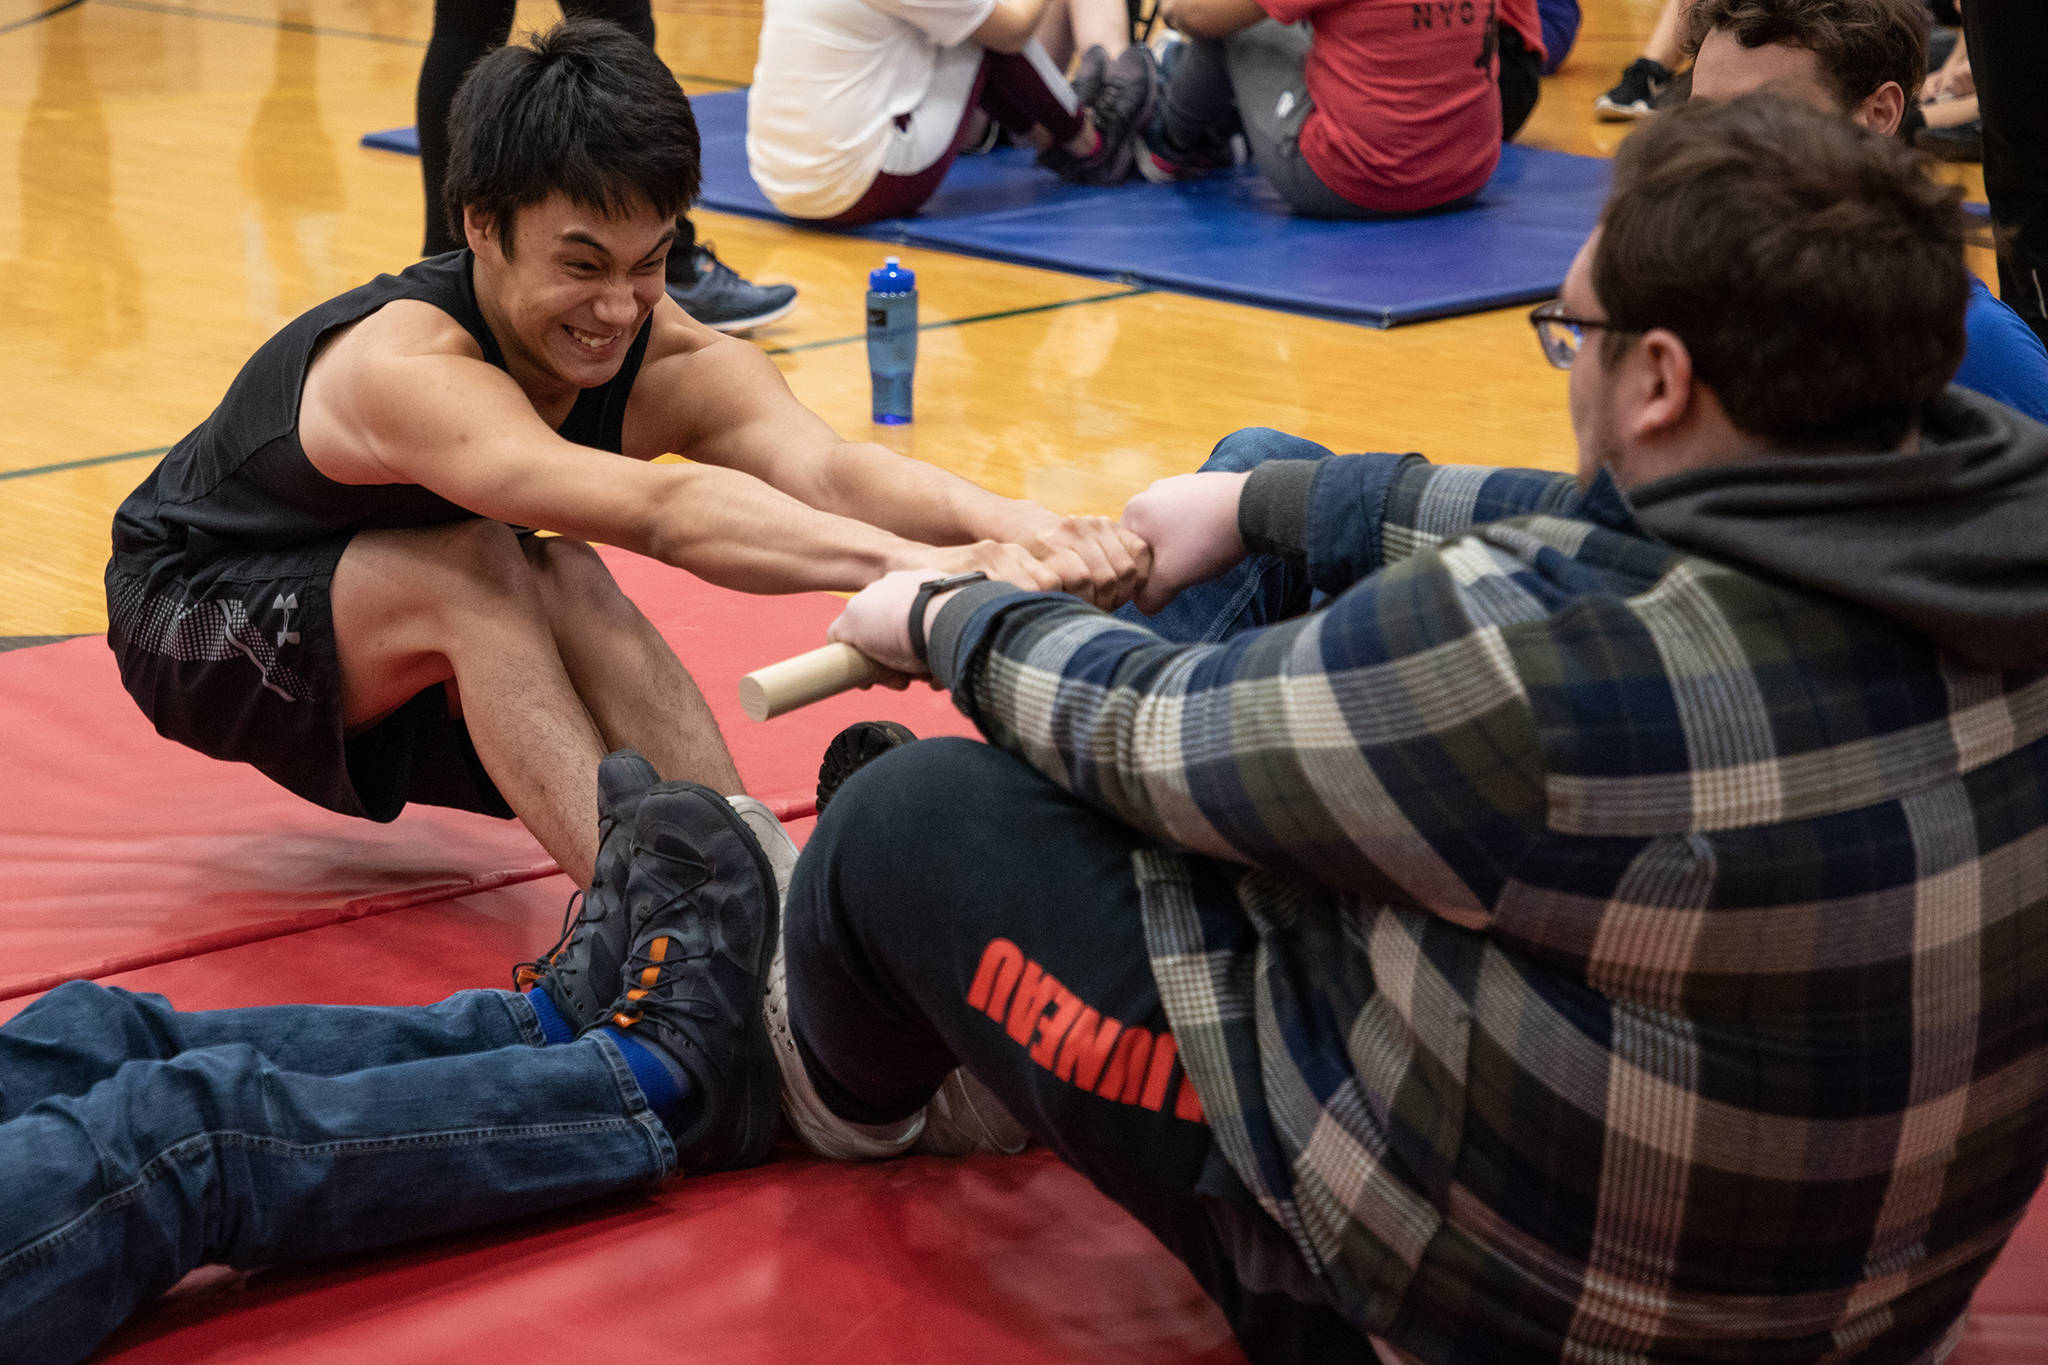 Bryan Johnson of Juneau shows effort on his face while competing in the Inuit stick pull at 2020 Traditional Games held Saturday and Sunday at Juneau-Douglas High School: Yadaa.at Kalé. (Courtesy Photo | Lyndsey Brollini, courtesy of Sealaska Heritage Institute)